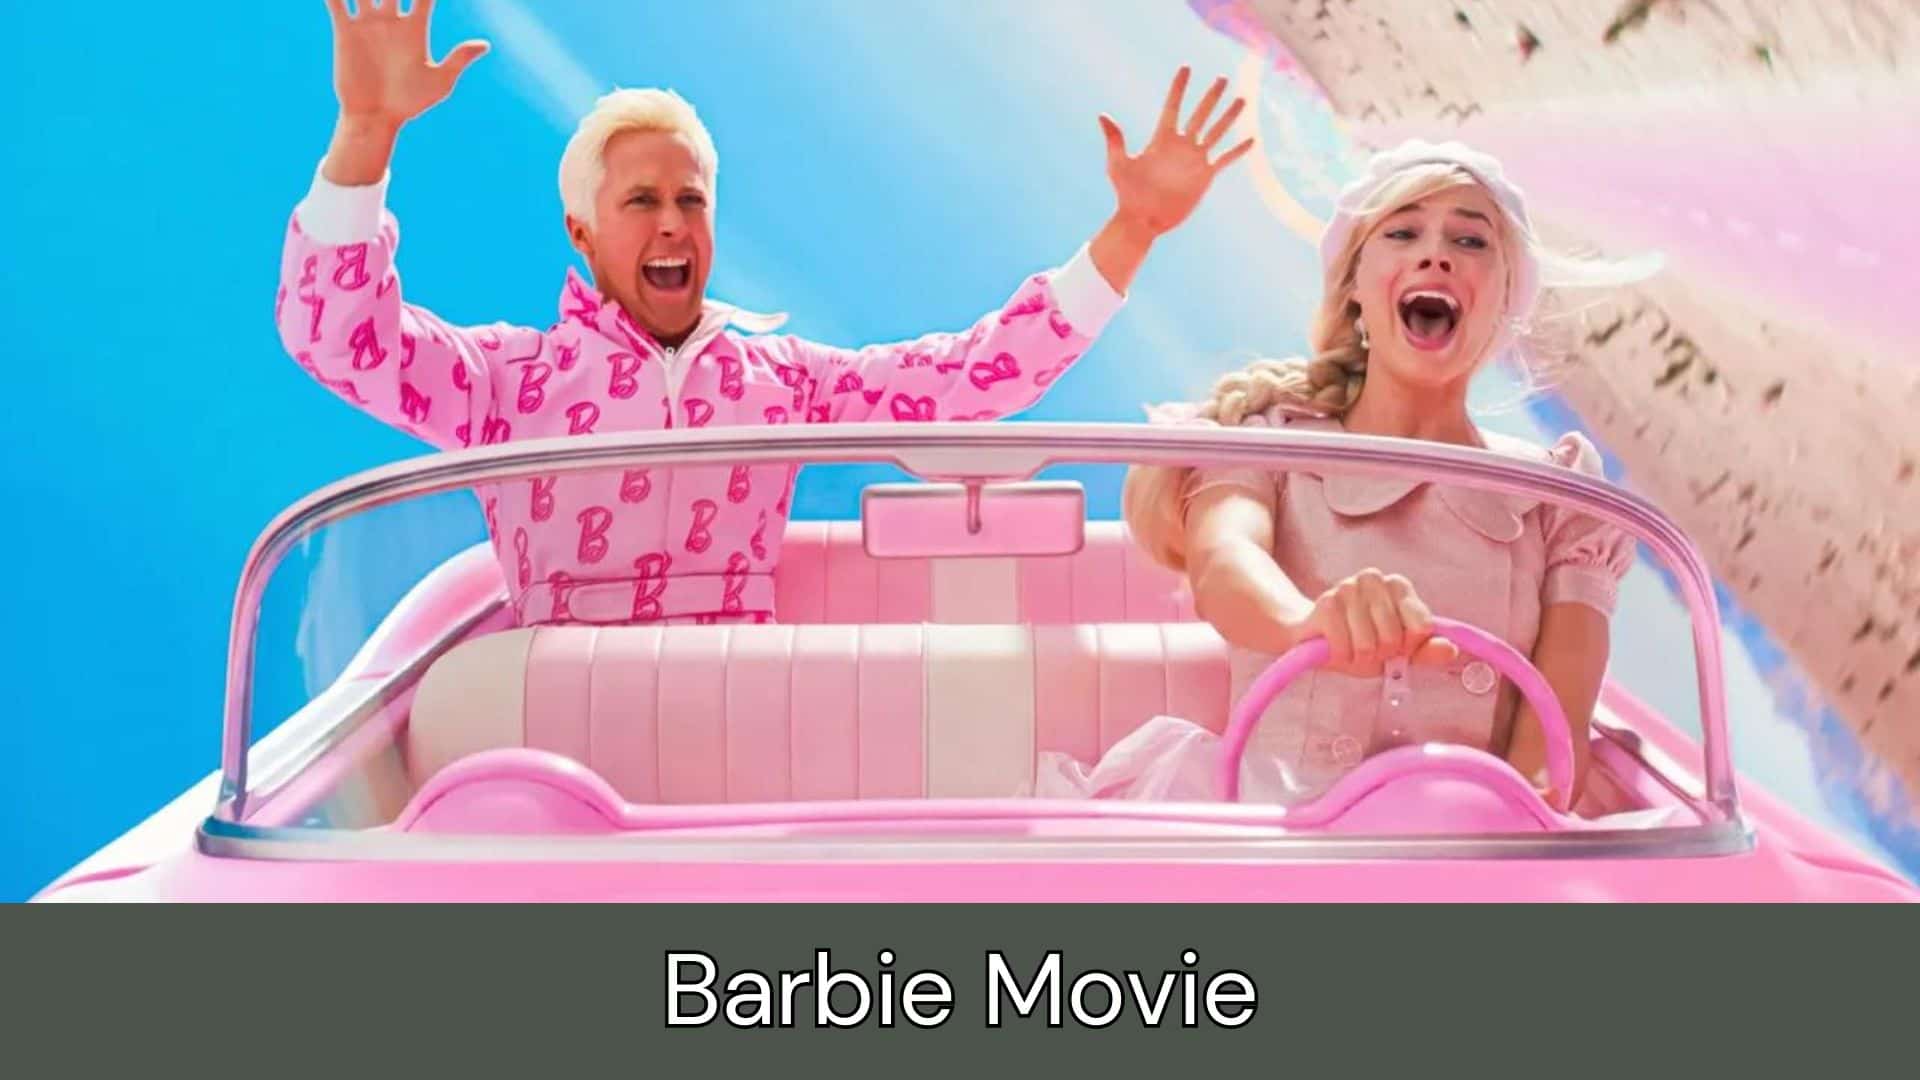 Barbie Movie Cast, Review, Age Rating, Trailer, Length, Box Office